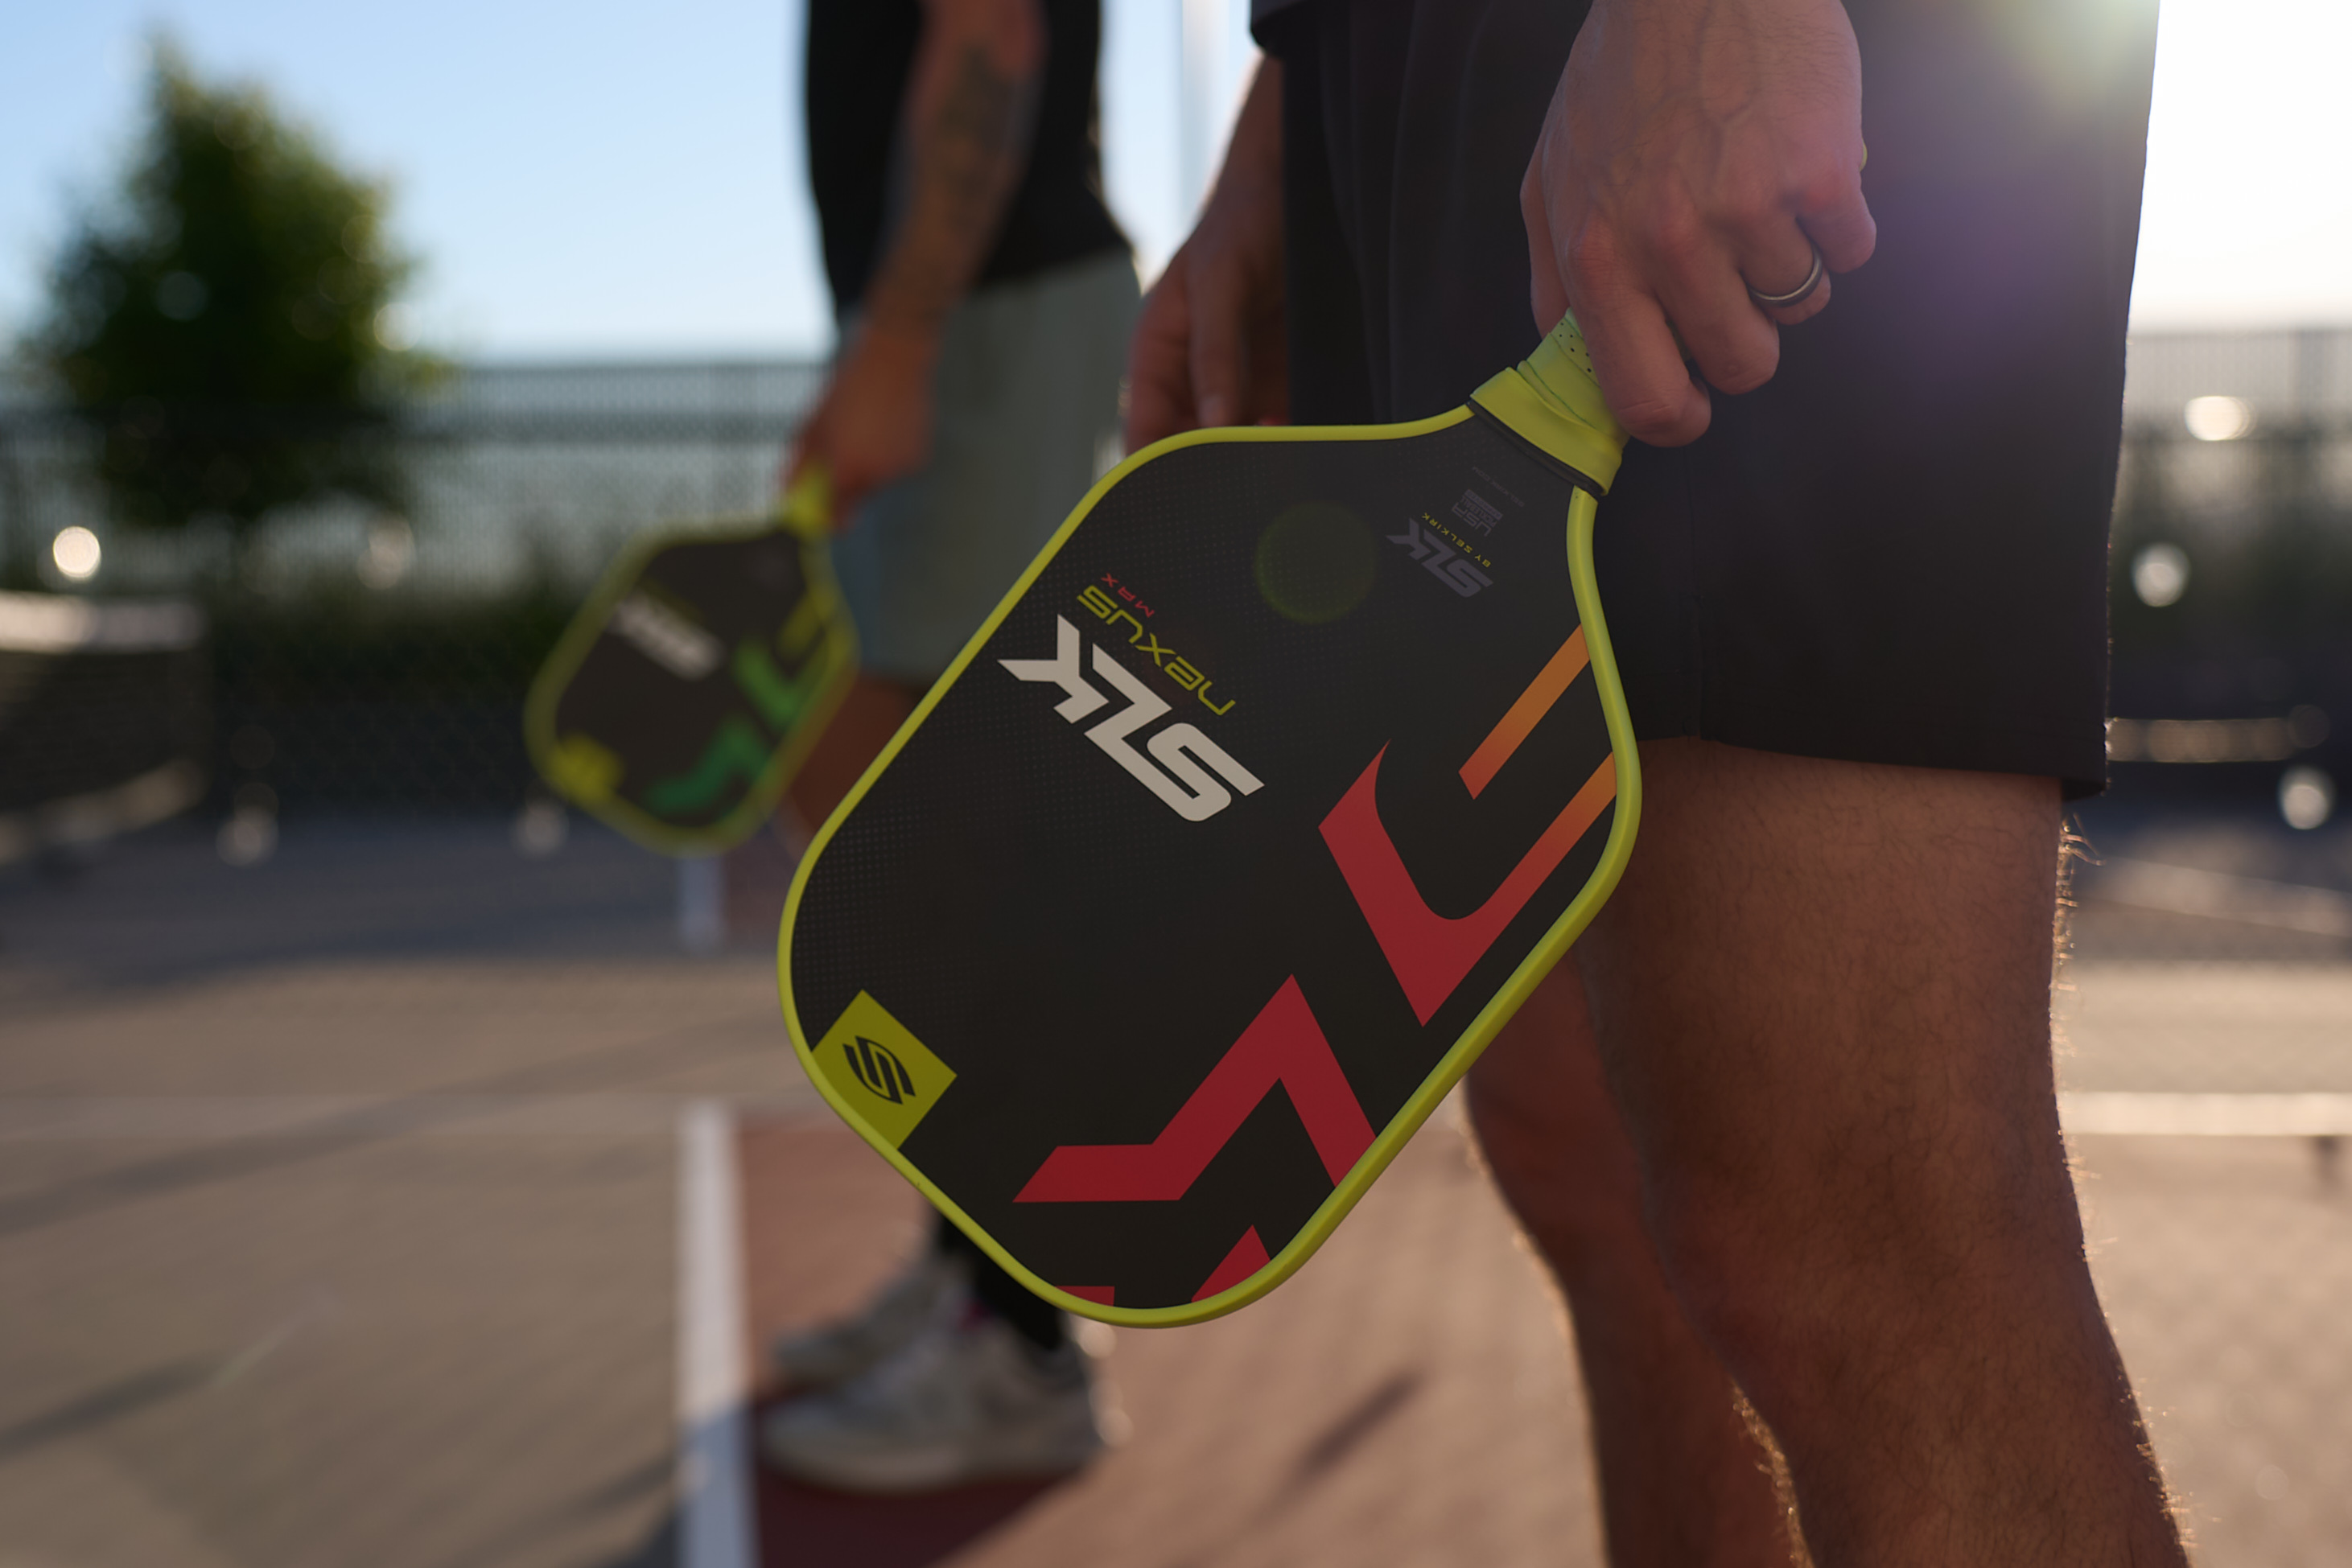 If you want to keep that brand-new look, here are our tips for cleaning your pickleball paddle.